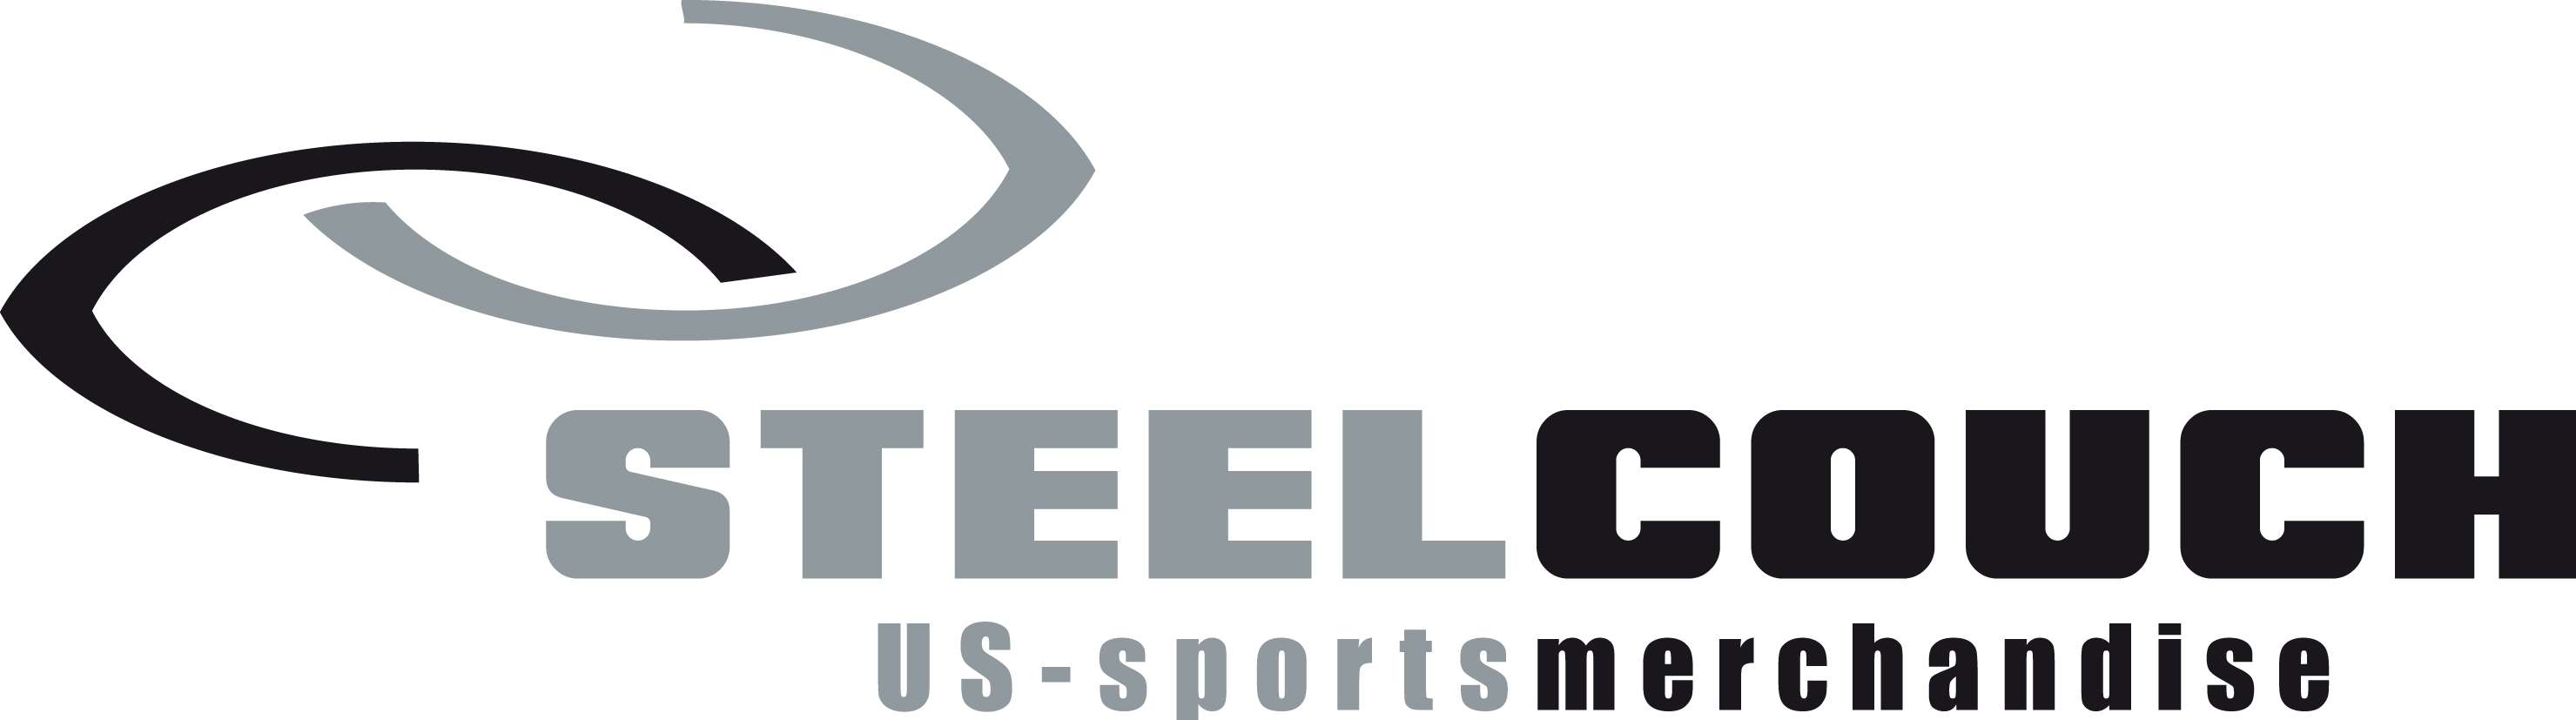 steelcouch US-sports merchandise